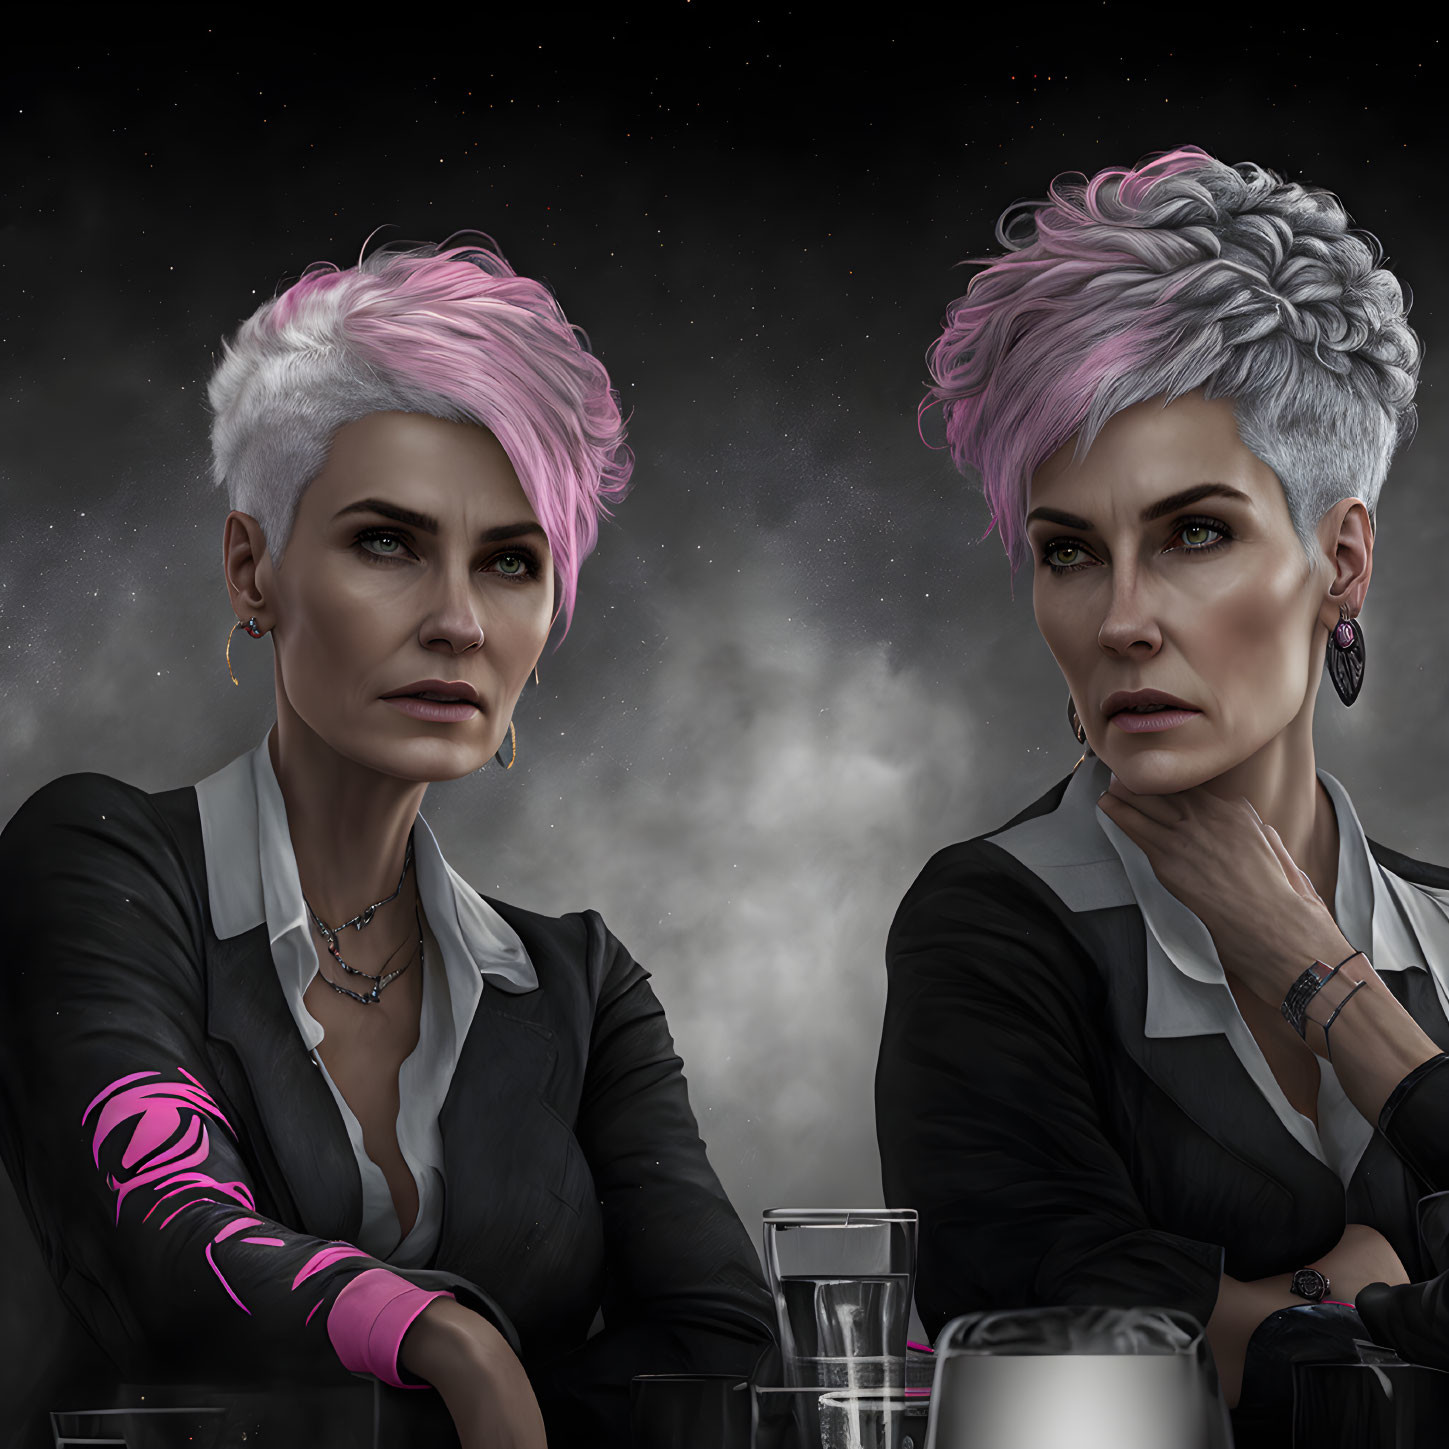 Two women with short white and pink hair in black outfits with pink accents against cosmic backdrop